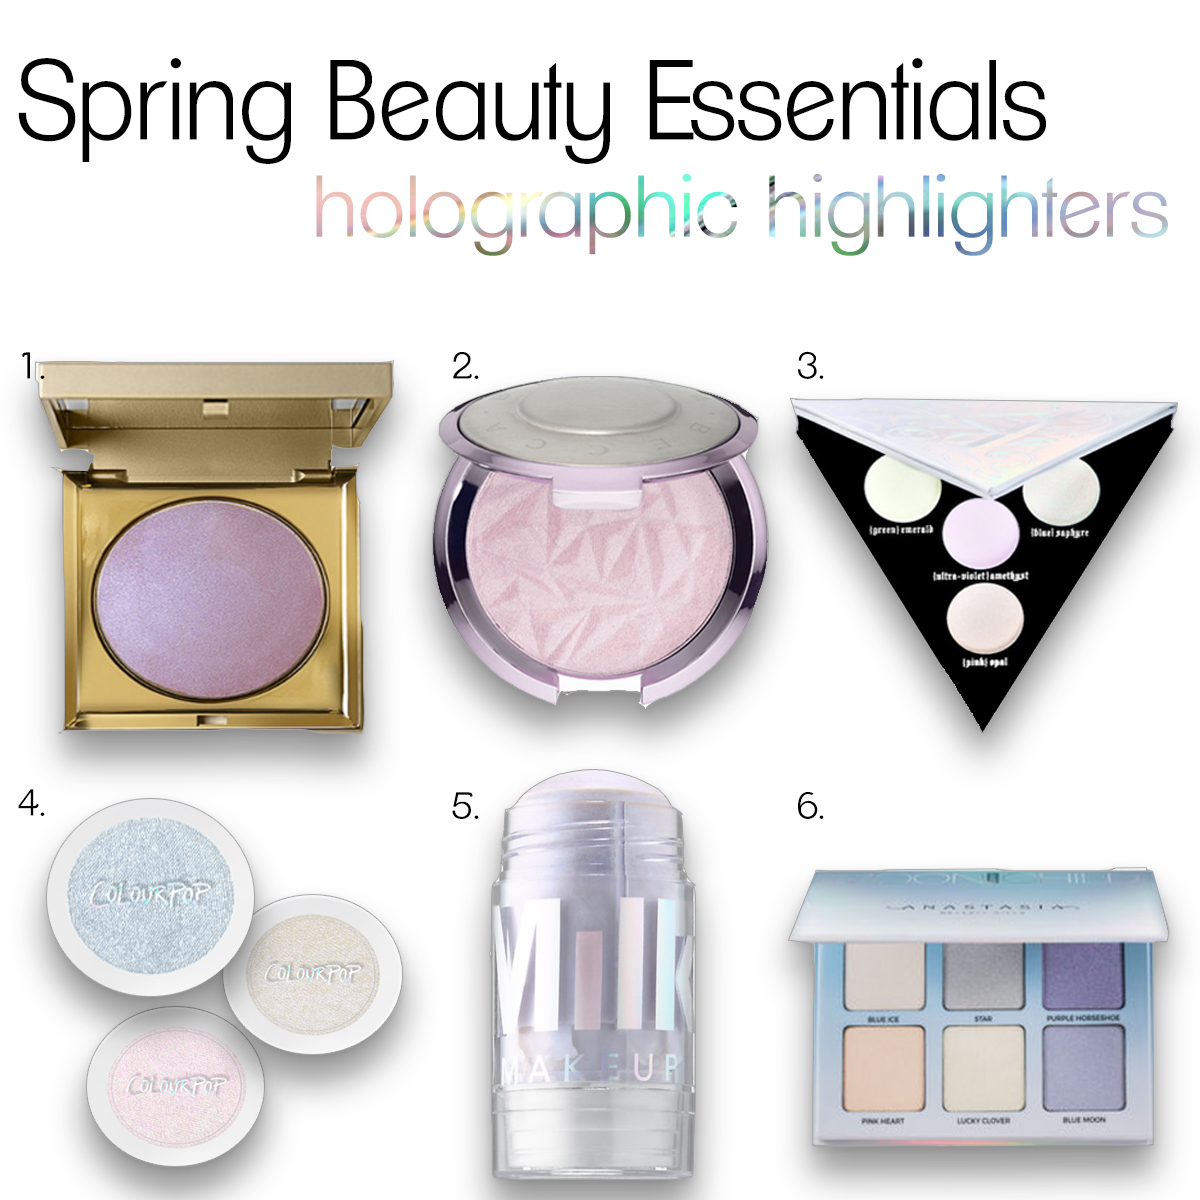 Holographic Highlighters